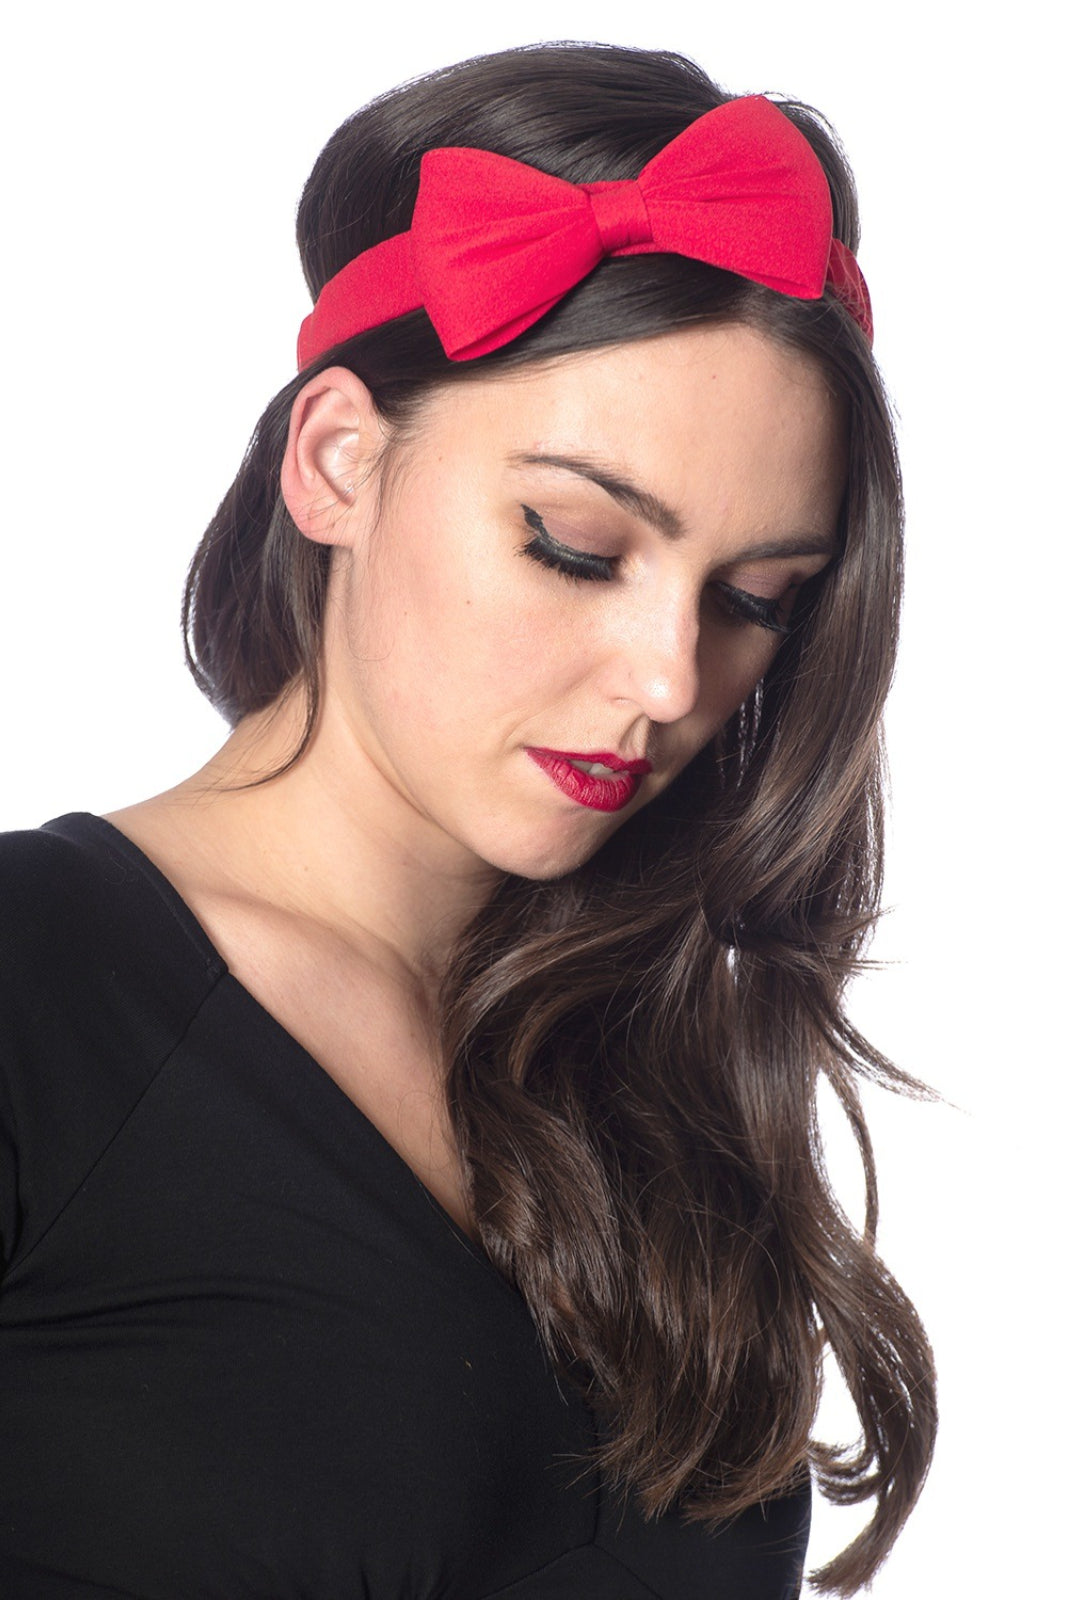 Banned 1950s Dionne Headband Pinup Hair Accessory